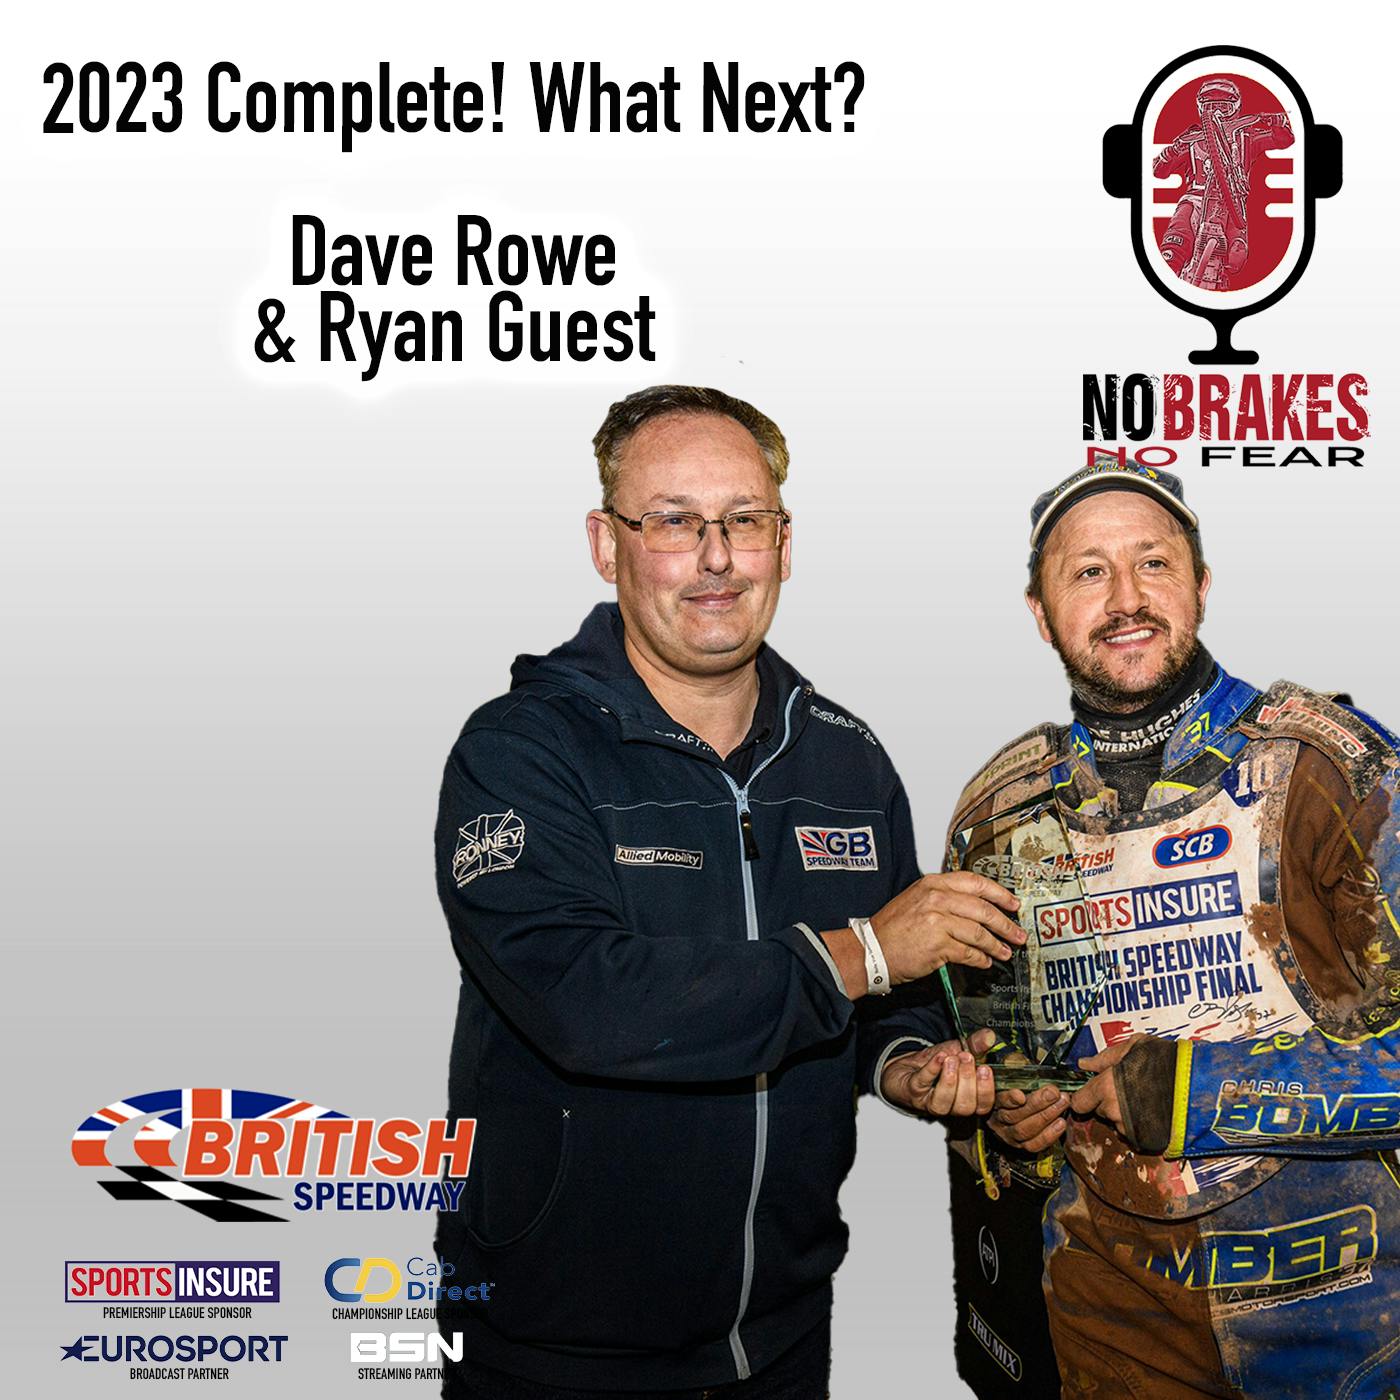 2023 Season Complete! What Next? Dave Rowe & Ryan Guest